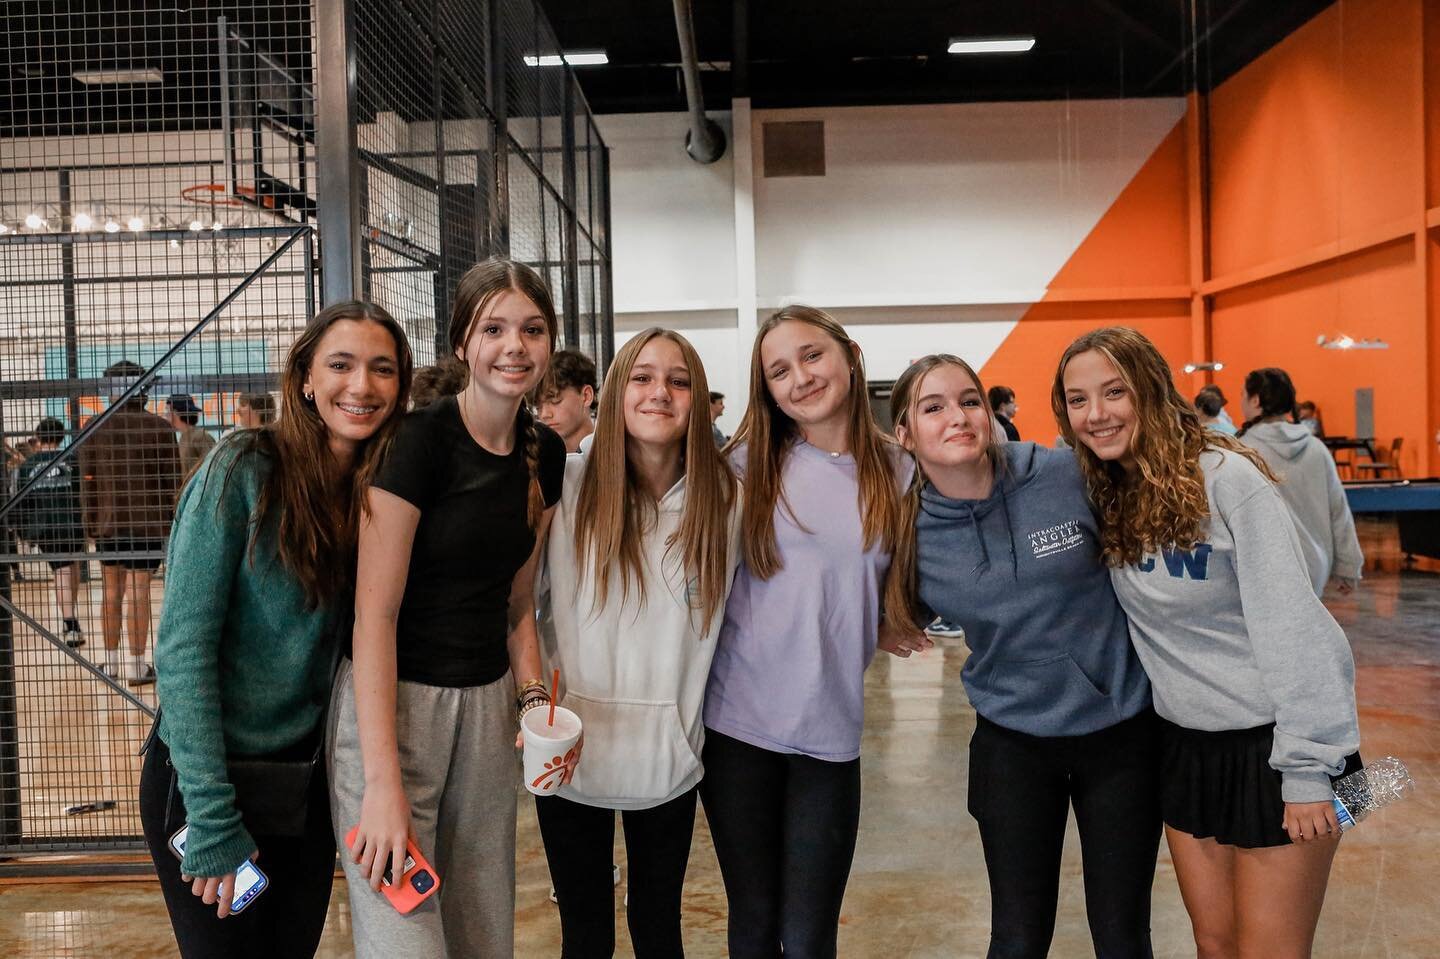 HAPPY WEDNESDAY STUDENTS!!!
We are B A C K for YG tonight and we can&rsquo;t wait to see you!!! Make sure to bring a friend when doors open!! 6pm!
We missed you so much last week but we we also loved worshiping our risen Savior with you all at worshi